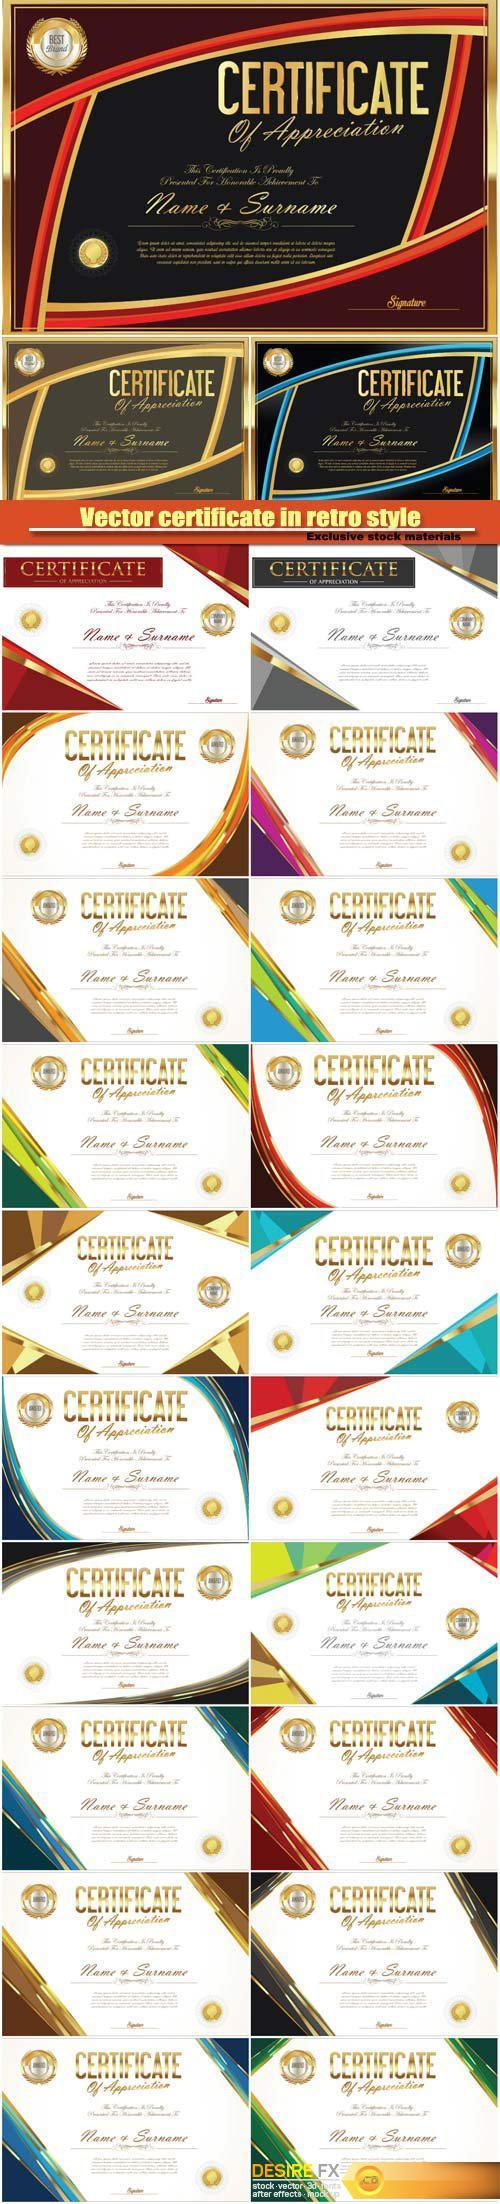 Vector certificate with a gold design in retro style